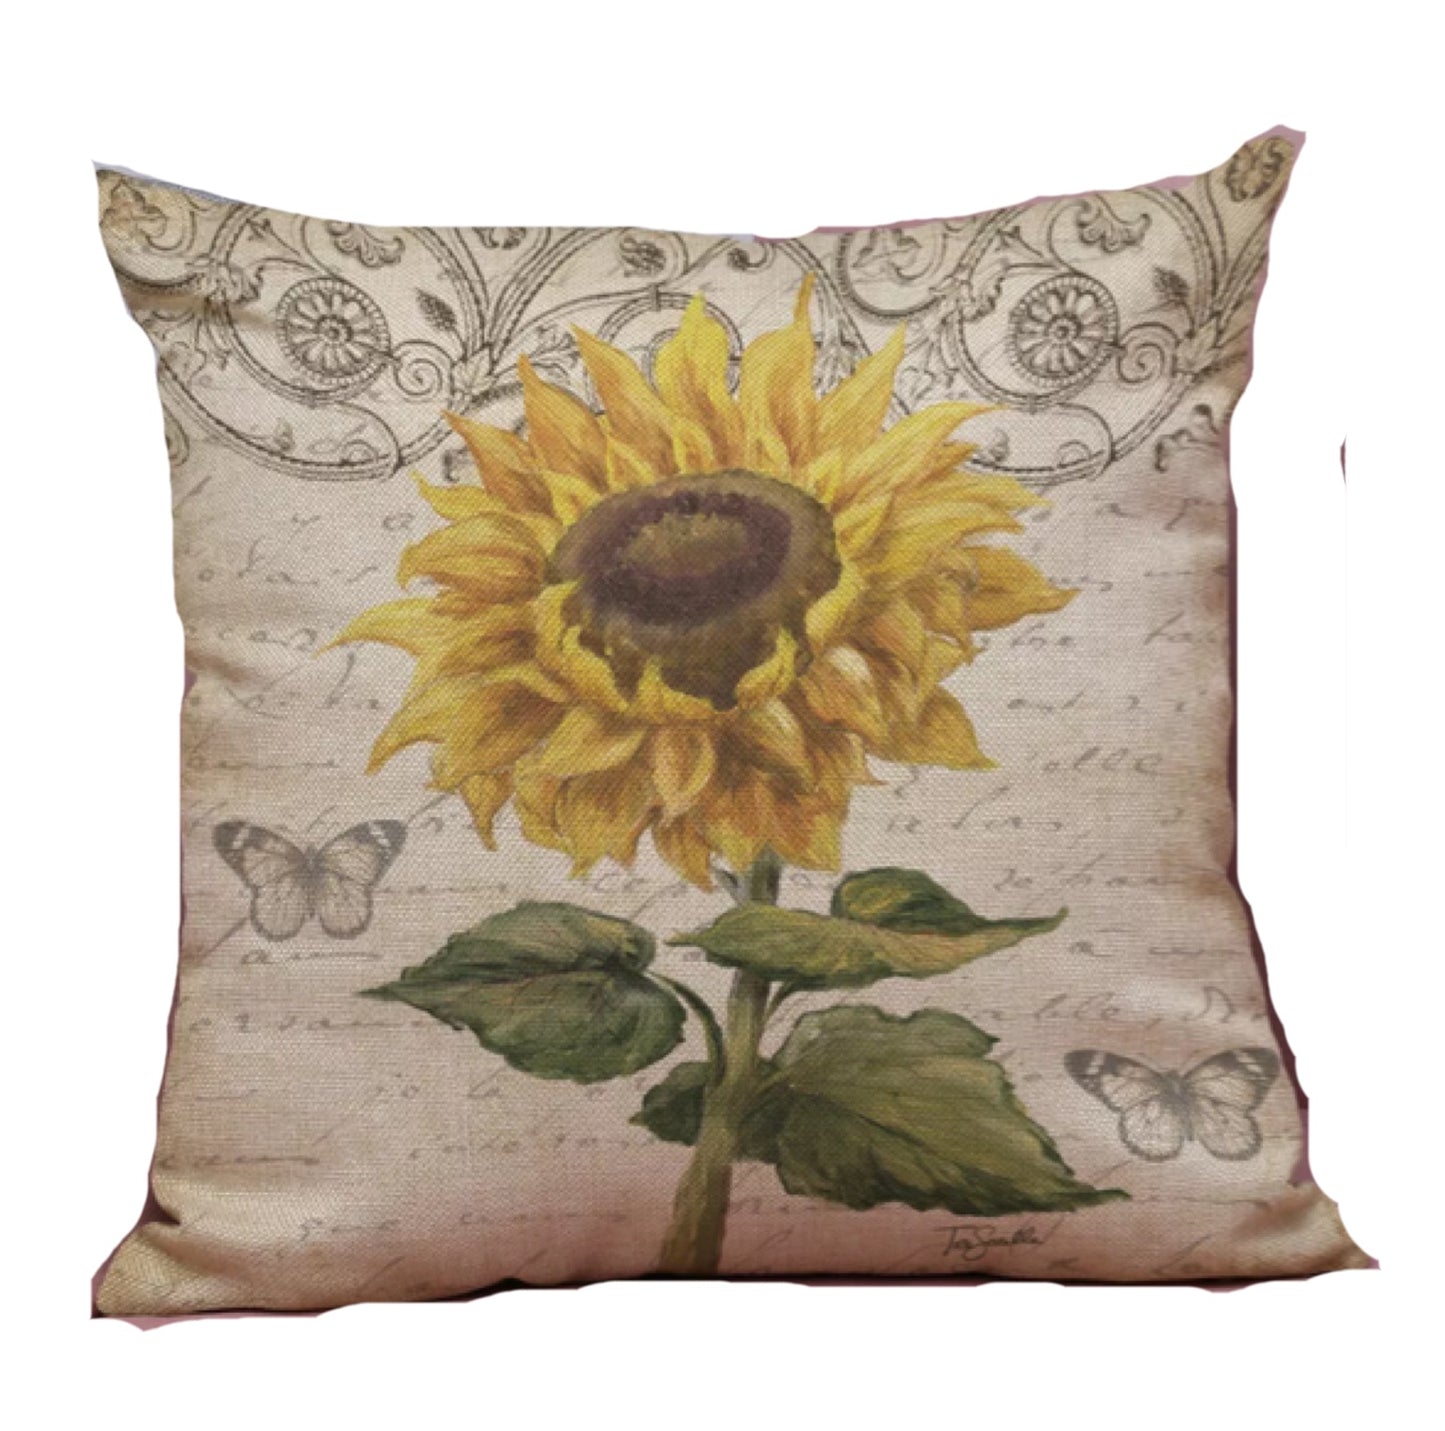 Cushion Cover Pillow Sunflower Butterfly Bliss - The Renmy Store Homewares & Gifts 